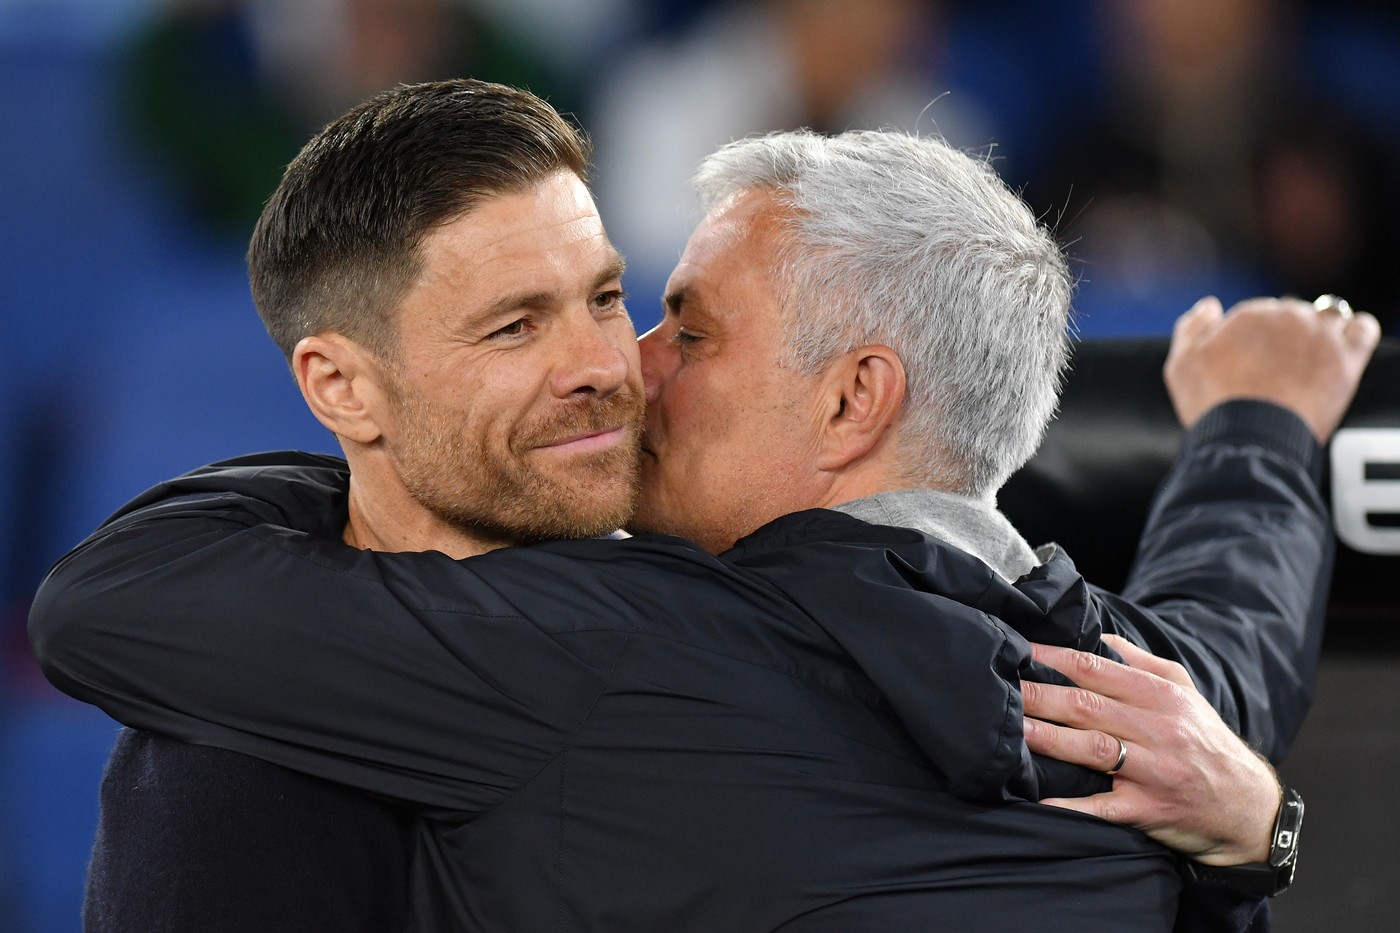 Bayer Leverkusen trainer Xabi Alonso and Roma trainer Jose Mourinho during the match between Roma and Bayer Leverkusen at the Stadio Olimpico. Rome (Italy), May 11st, 2023,Image: 775319071, License: Rights-managed, Restrictions: * Italy Rights OUT *, Model Release: no, Credit line: Massimo Insabato / Zuma Press / Profimedia